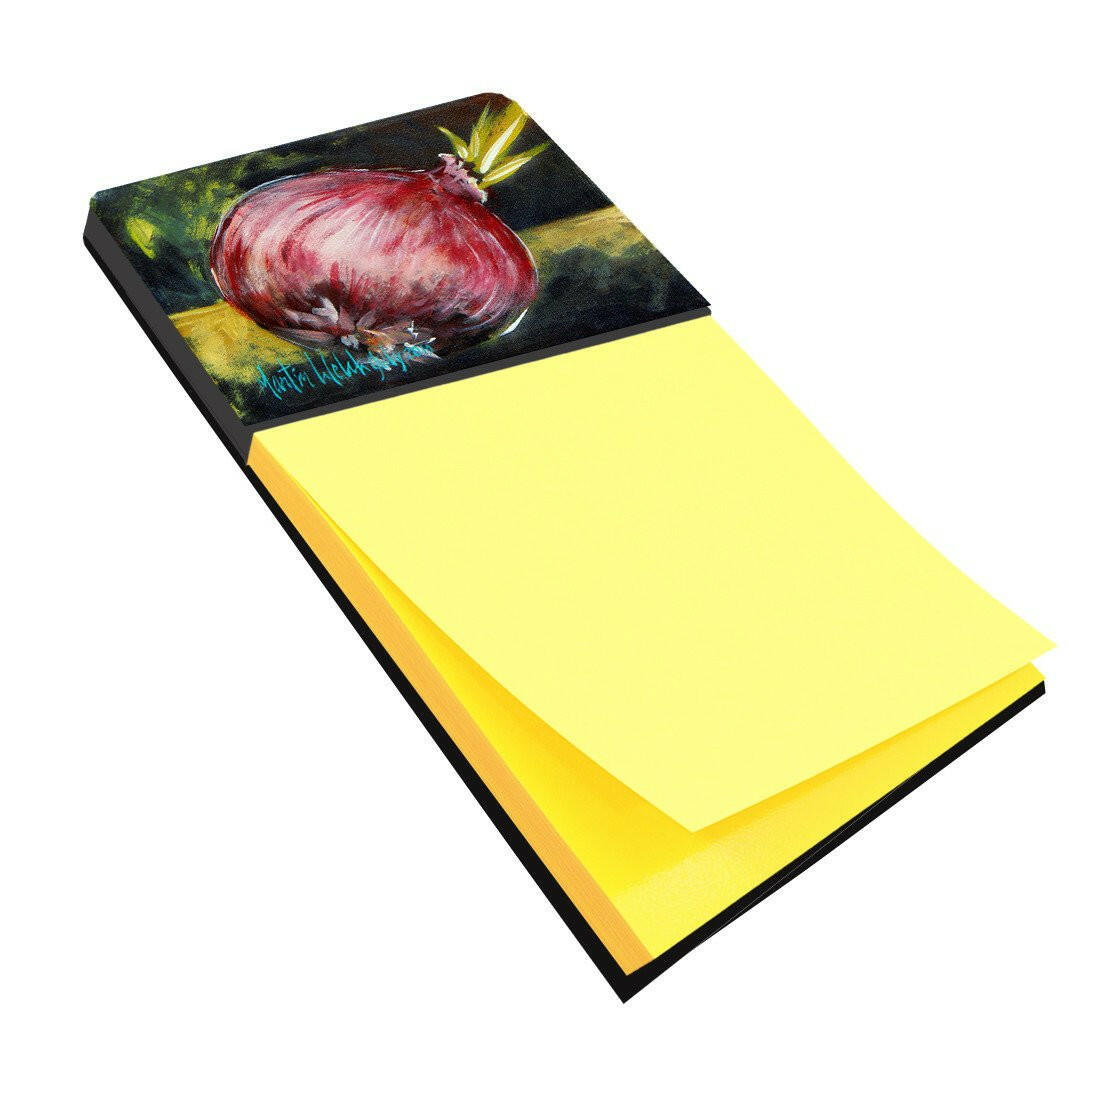 Vegetables - Onion One-Yun Refiillable Sticky Note Holder or Postit Note Dispenser MW1092SN by Caroline's Treasures